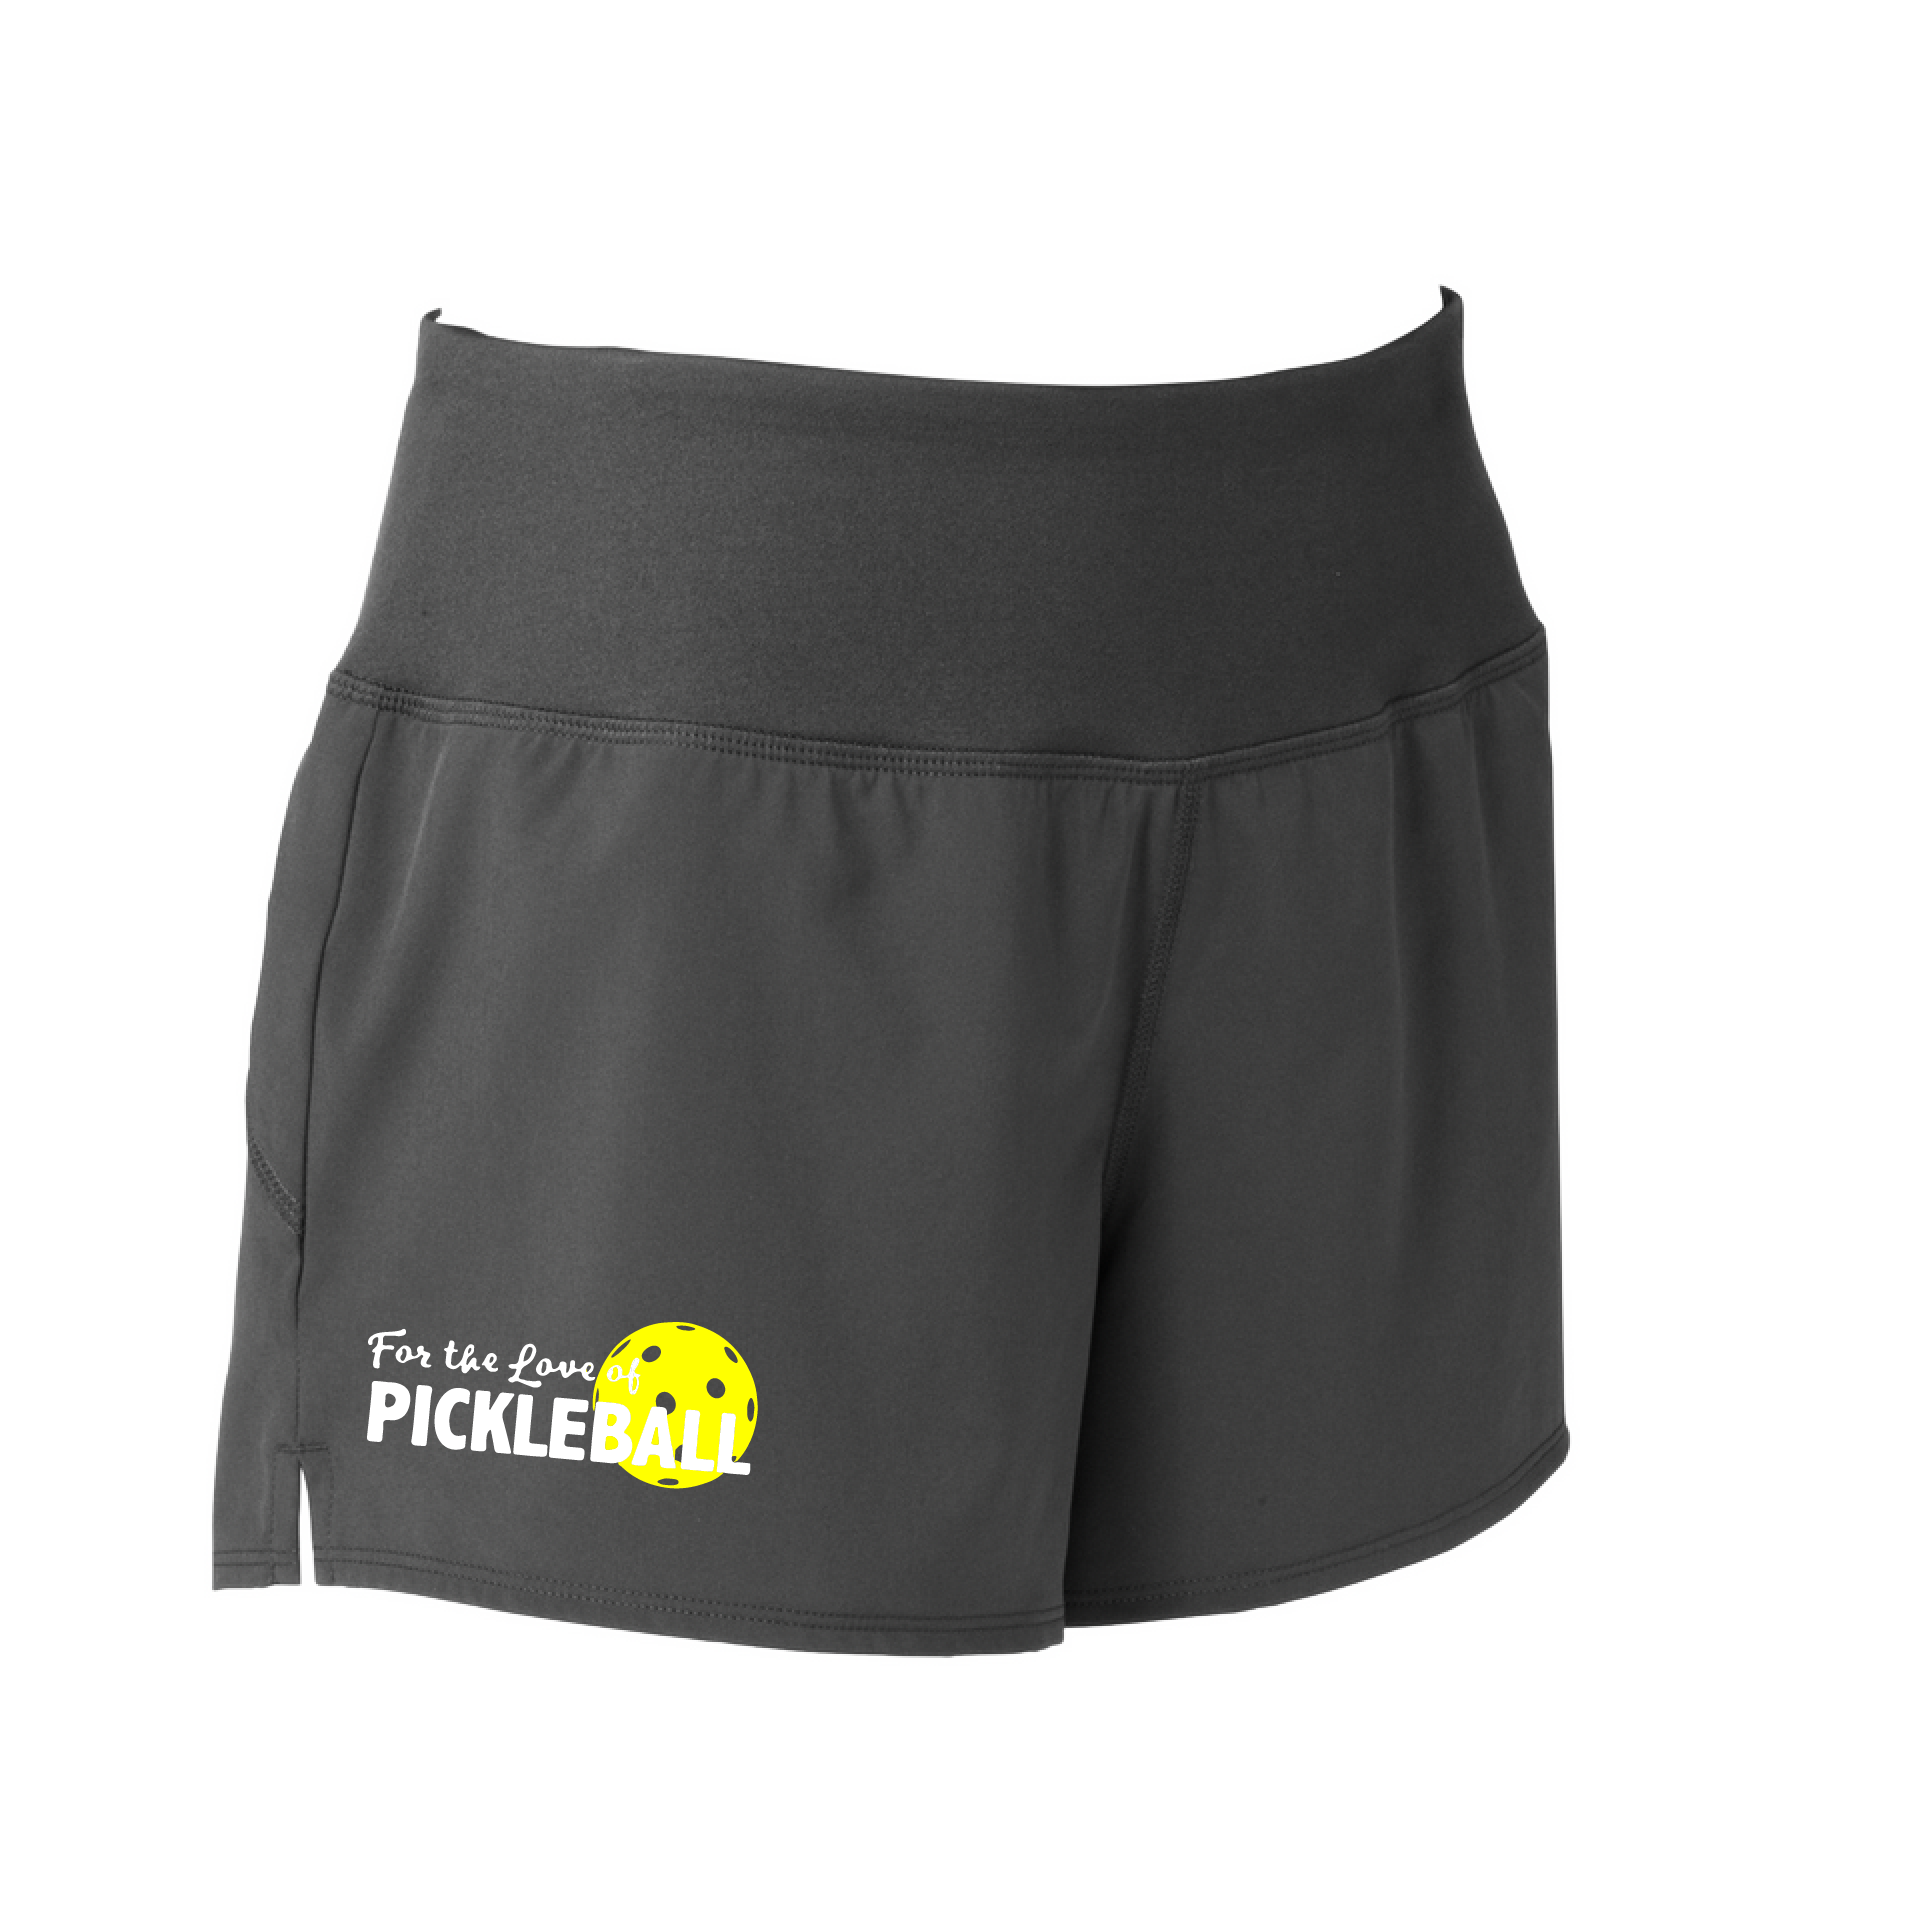 Shorts Pickleball Designs: For the Love of Pickleball  Sport Tek women’s repeat shorts come with built-in cell phone pocket on the exterior of the waistband. You can also feel secure knowing that no matter how strenuous the exercise, the shorts will remain in place (it won’t ride up!). These shorts are extremely versatile and trendy. Transition from the Pickleball court to running errands smoothly.